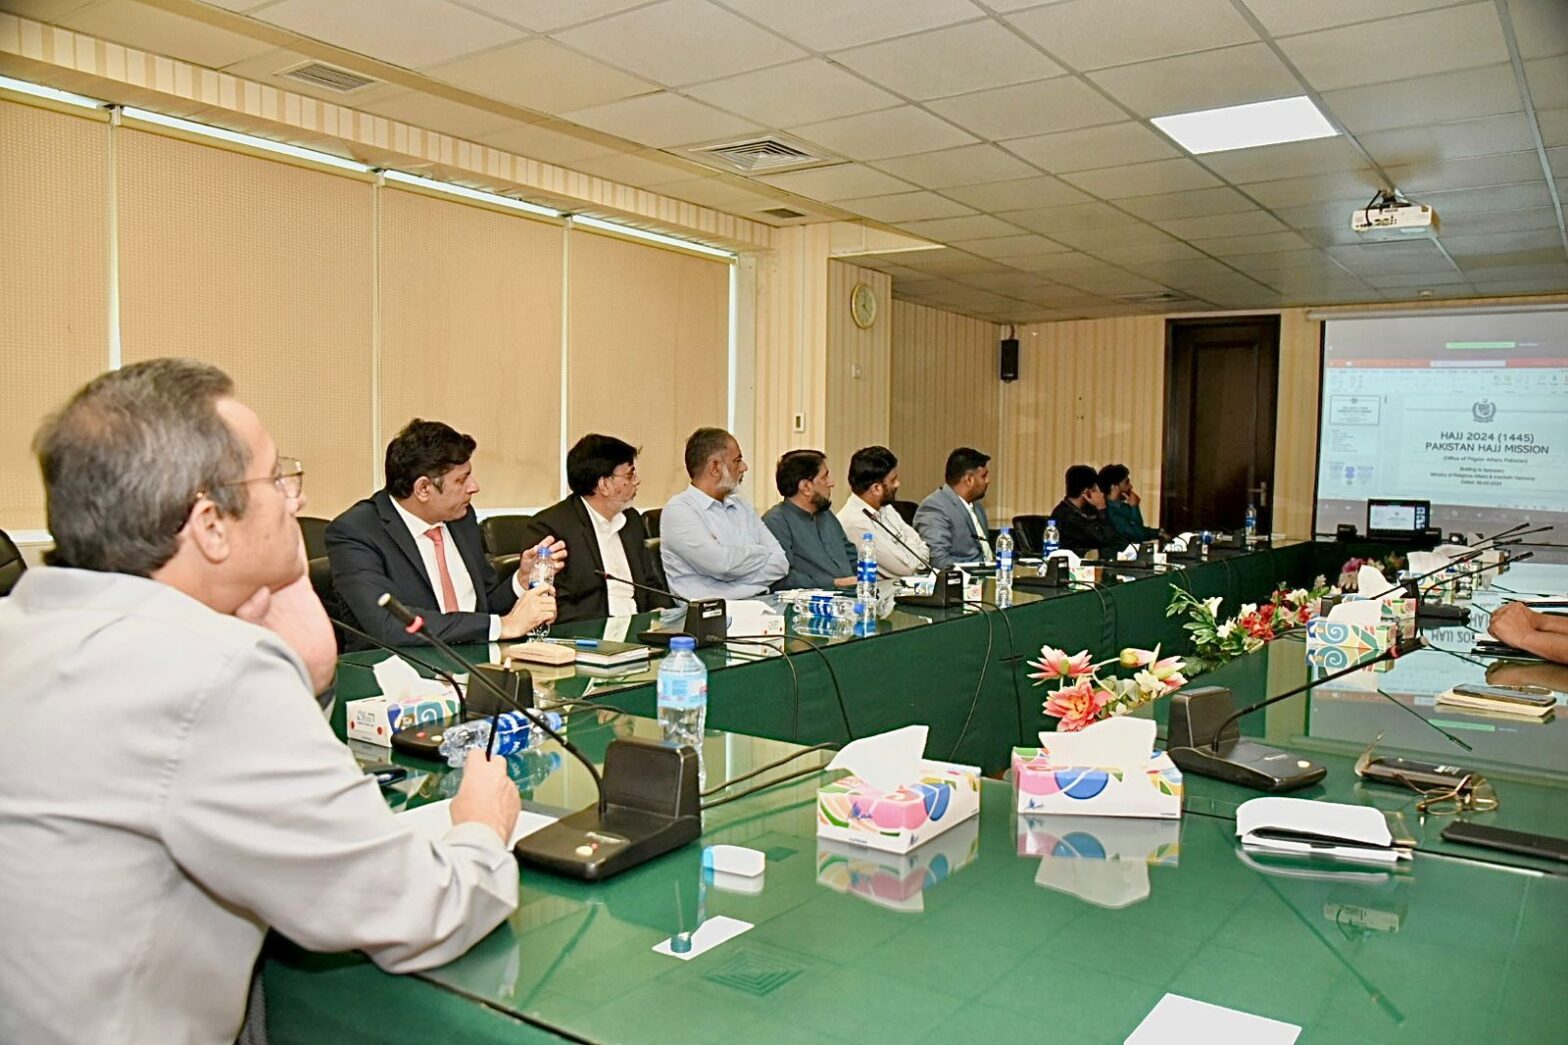 Secy religious affairs chairs Zoom meeting, ensures Hajj pilgrims' smooth experience